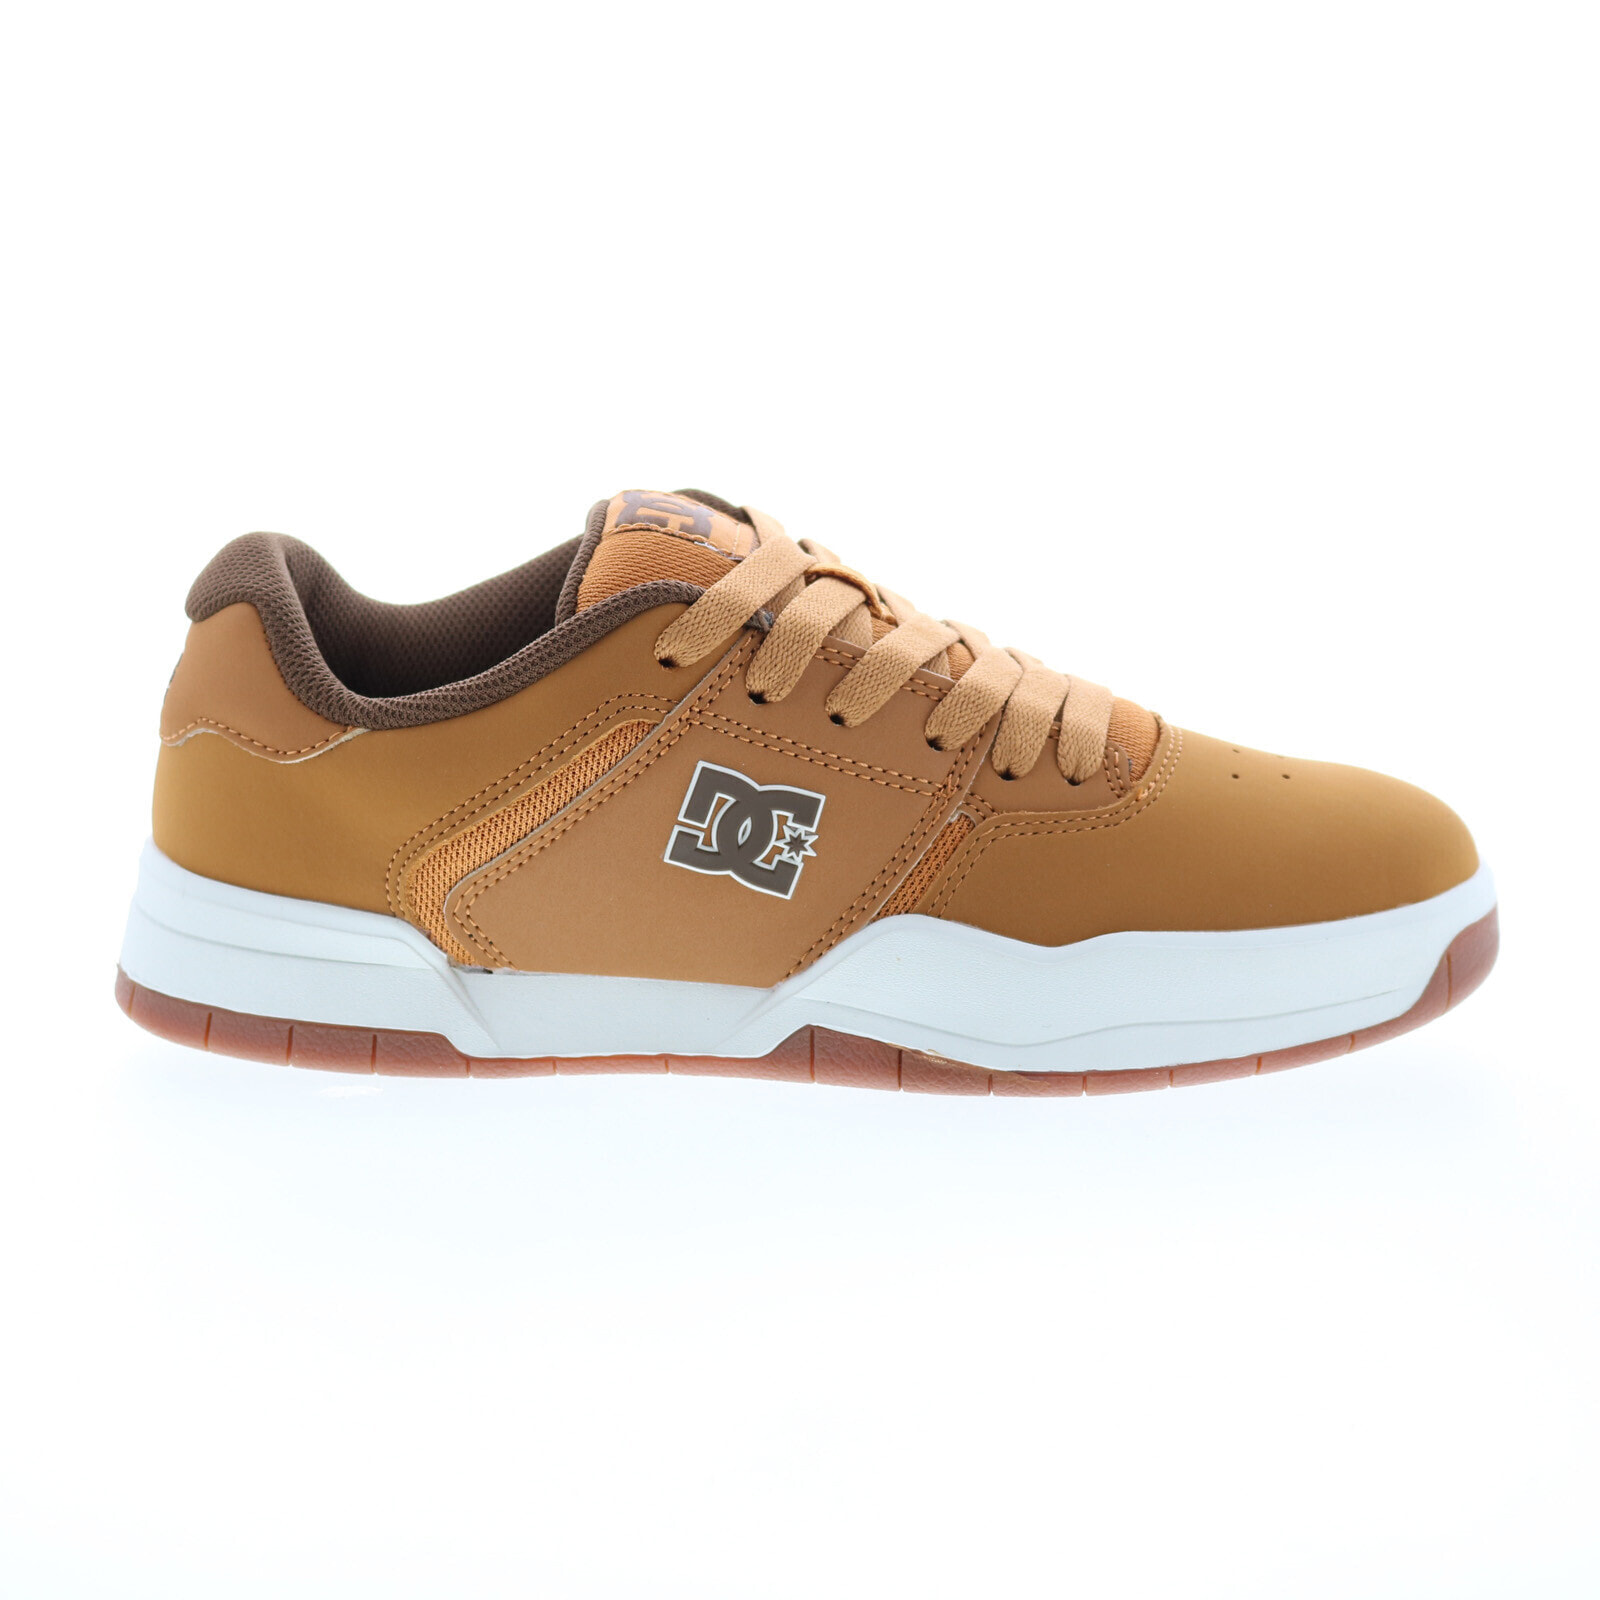 DC Central ADYS100551-WD4 Mens Brown Nubuck Skate Inspired Sneakers Shoes